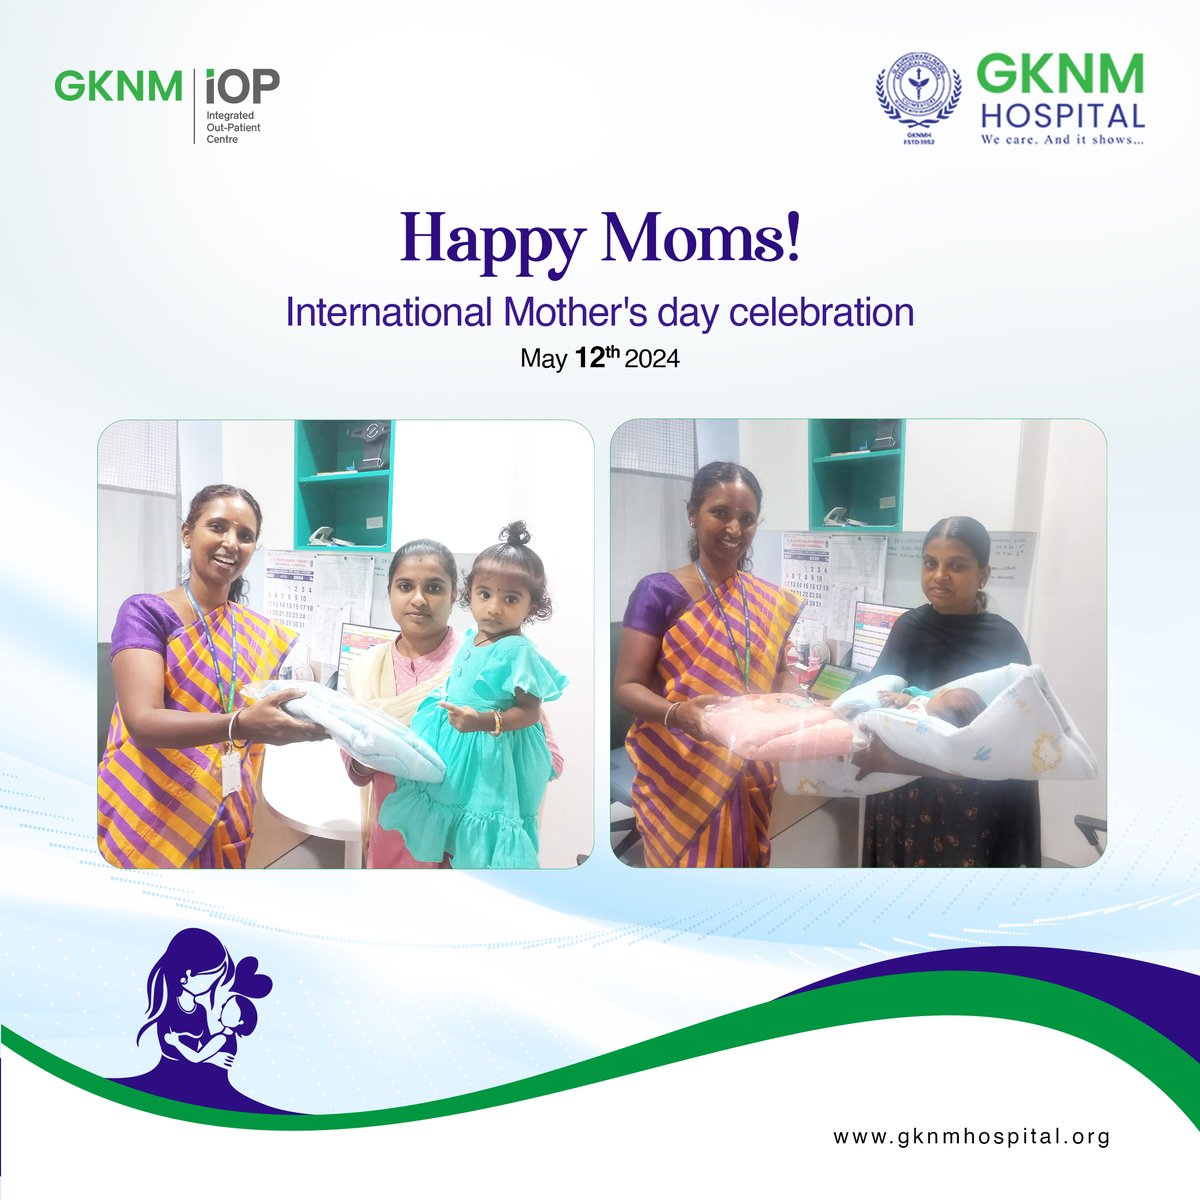 We at #GKNMHospital celebrated #MothersDay with joy and gratitude. Here are some quick glimpses of our heartwarming celebrations, where we honored the incredible mothers who inspire us every day. A big thank you to everyone who joined us in making this day so memorable! #GKNM